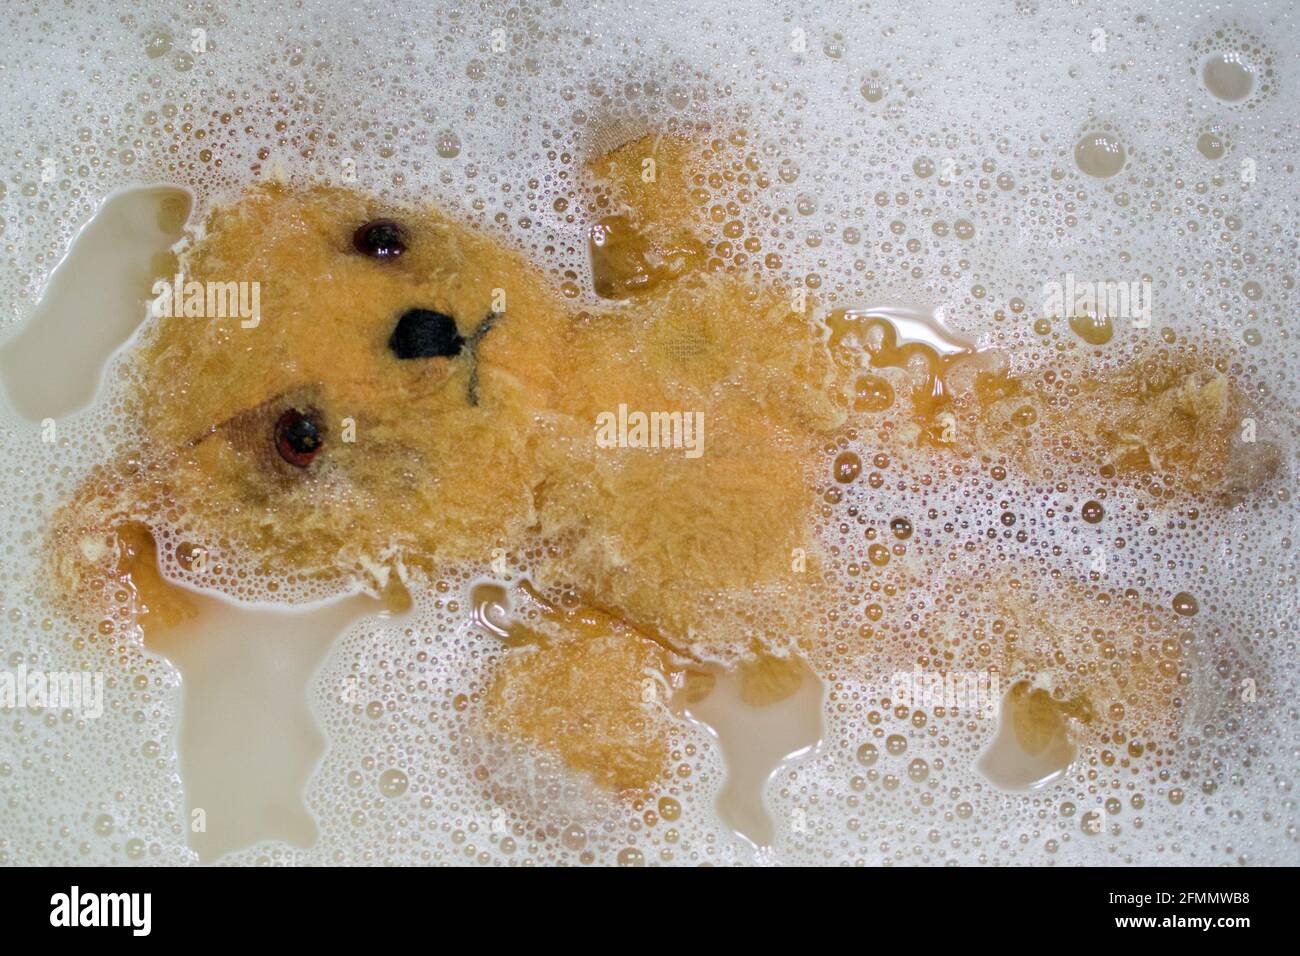 Much loved, yellow teddy bear floating on his back surrounded by soap suds in the bath Stock Photo